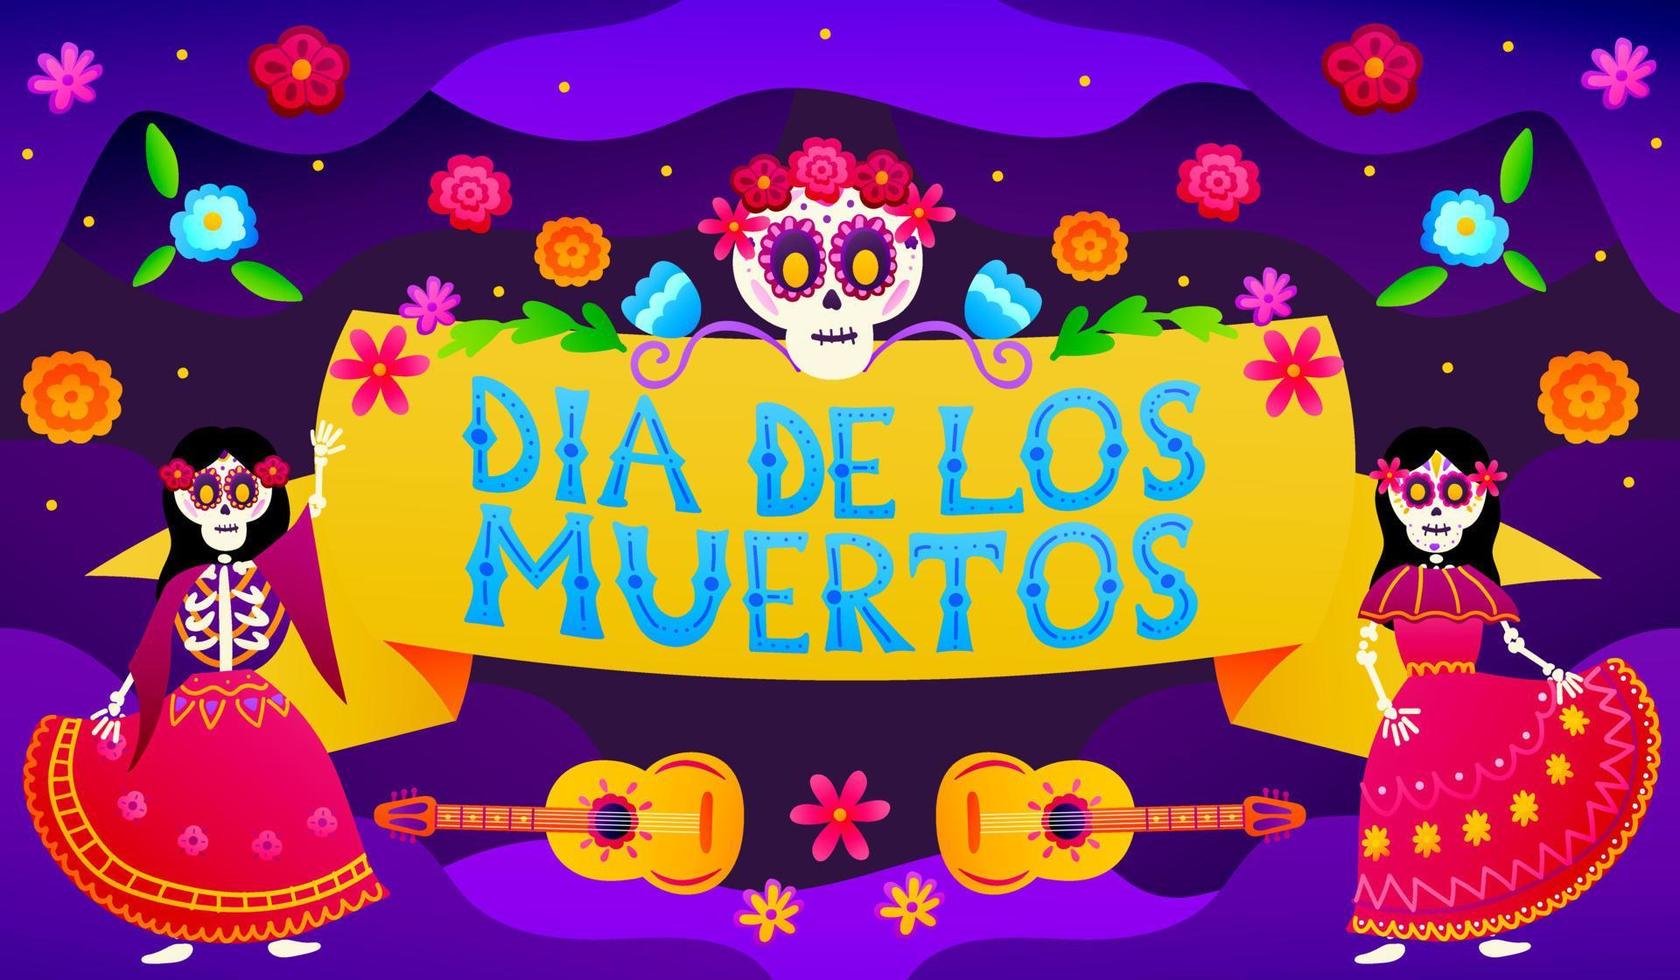 Greeting card for mexican holiday dia de los muertos festival with colourful lettering and dancing skeleton characters in traditional outfits, floral ornate and sugar skulls, day of the dead vector